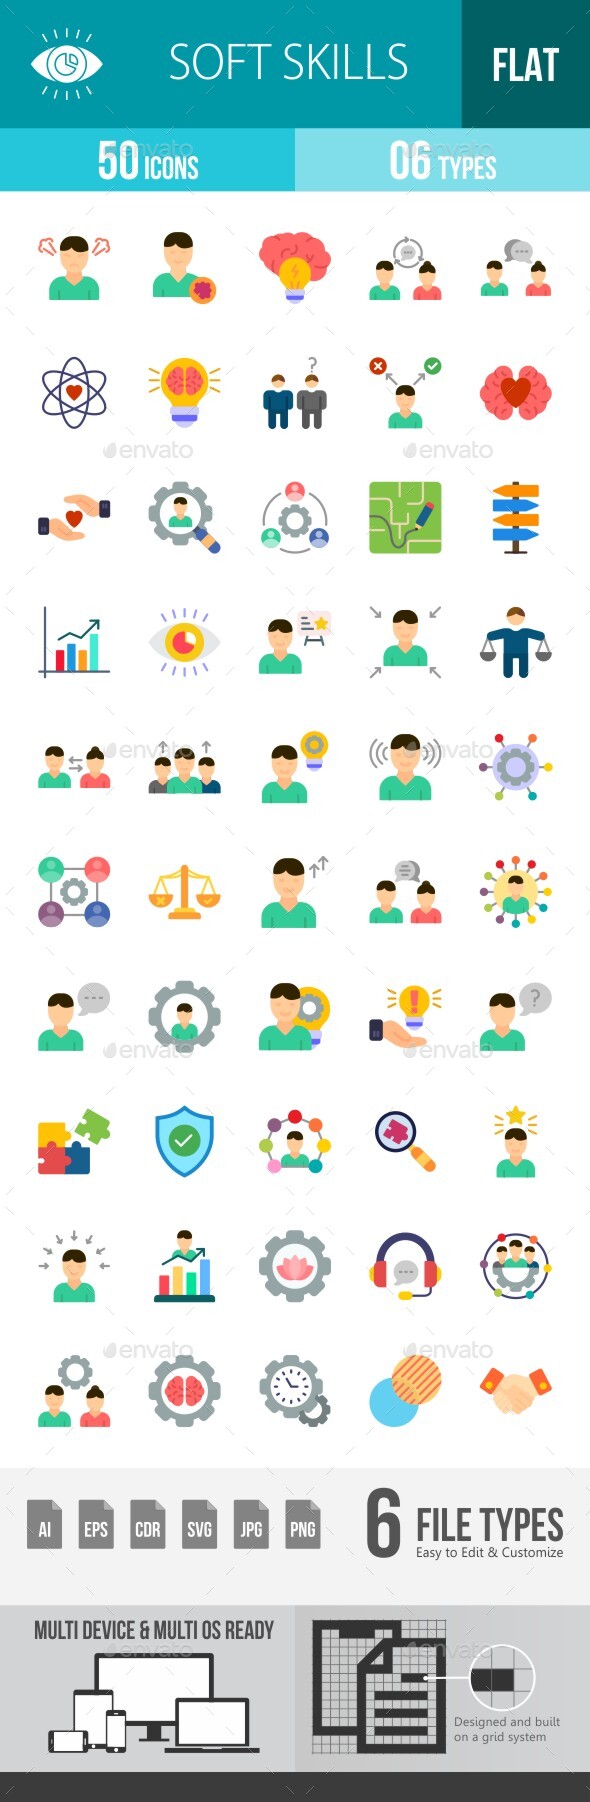 [DOWNLOAD]Soft Skills Flat Multicolor Icons